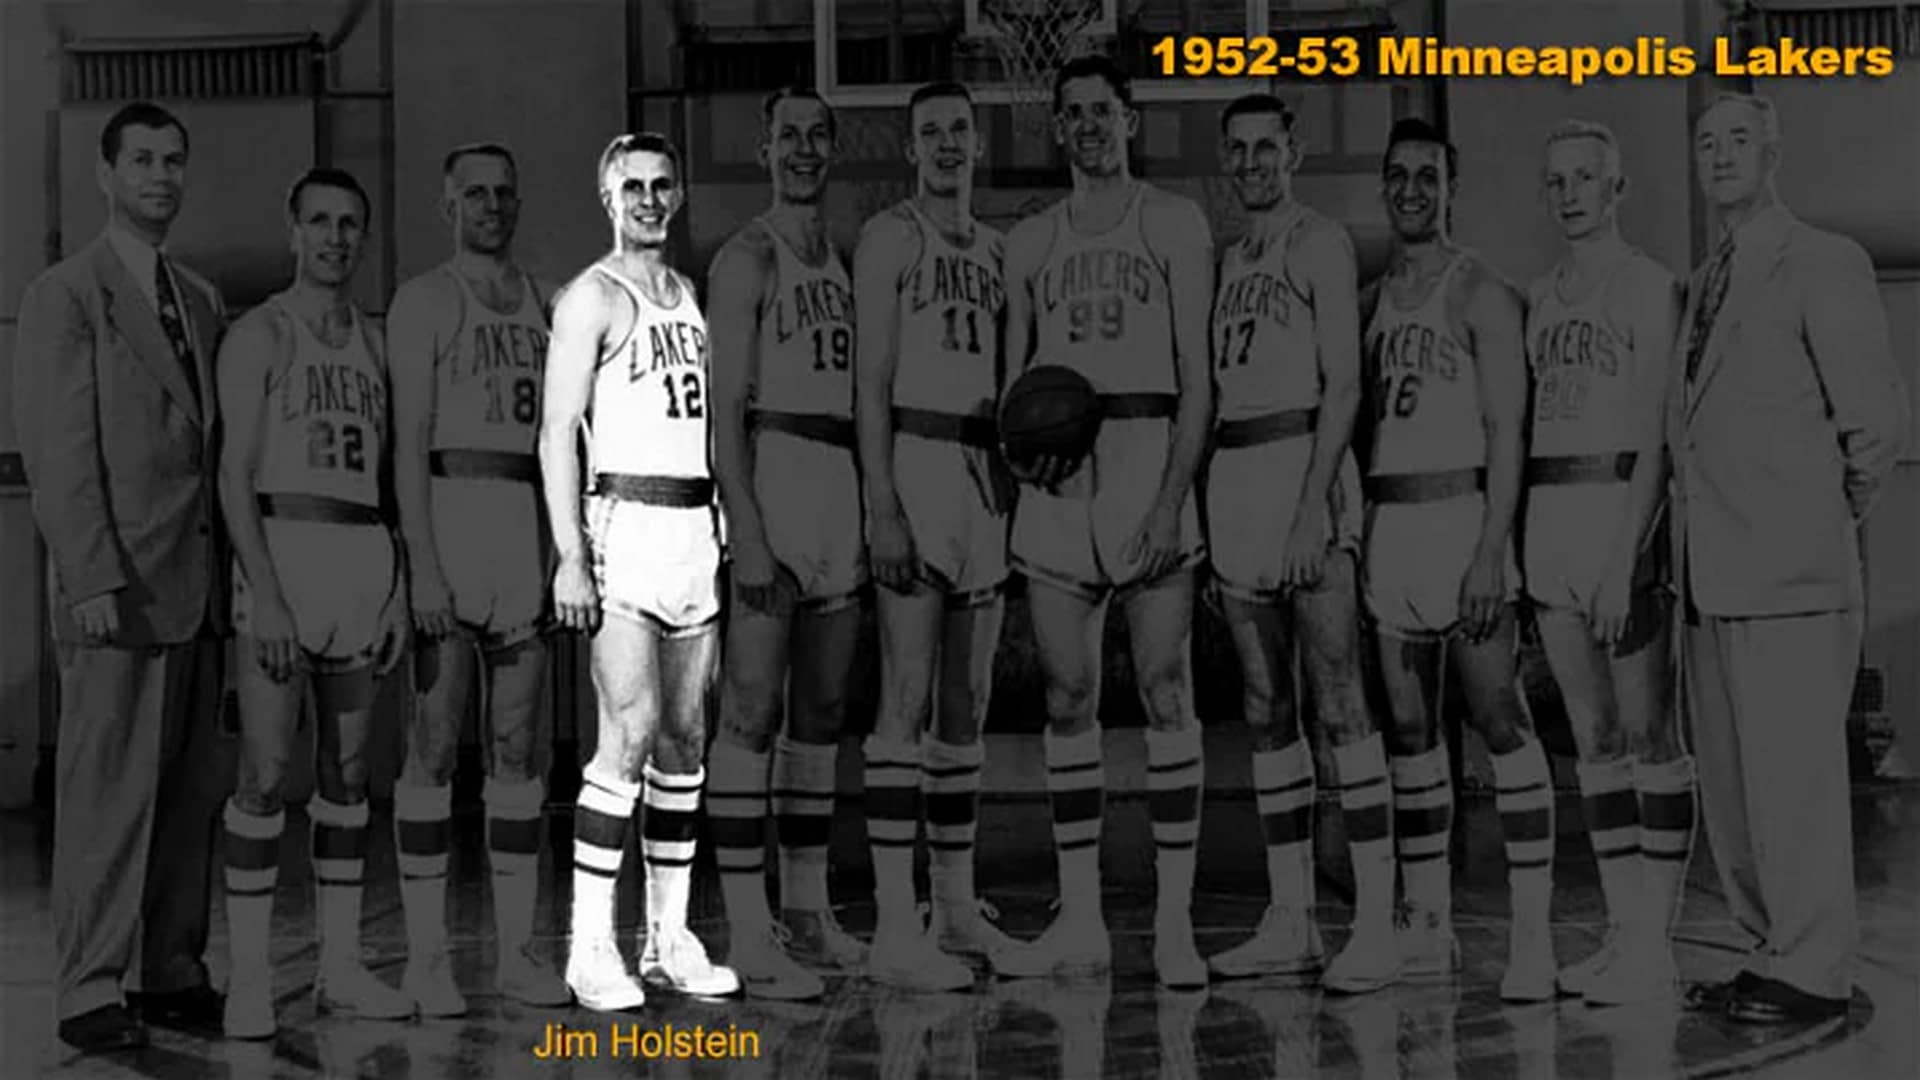 Jim Holstein - Youngest Players in an NBA to win Championship